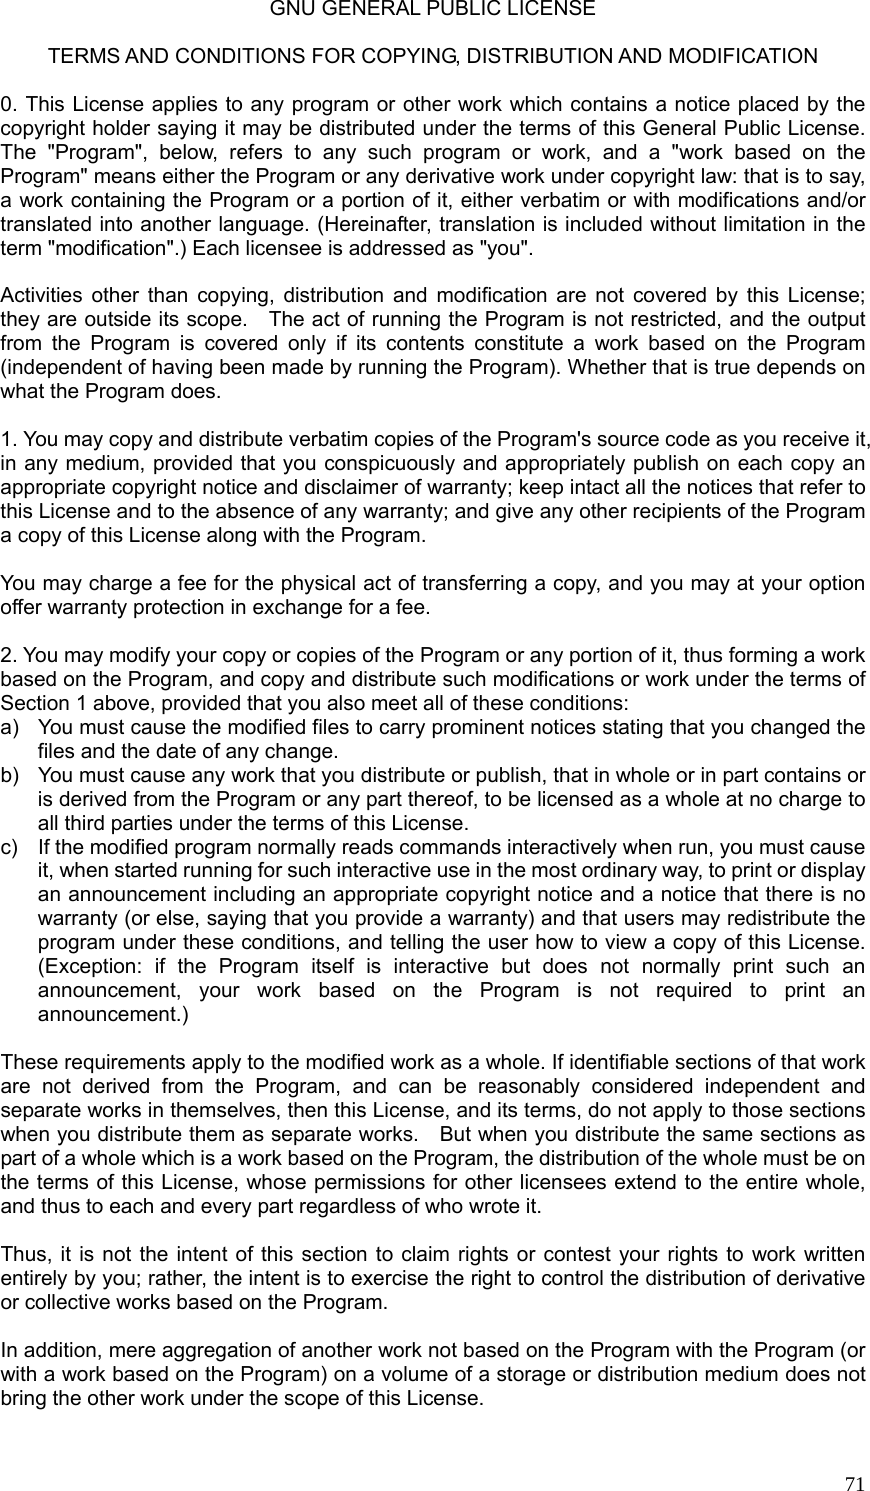  71GNU GENERAL PUBLIC LICENSE  TERMS AND CONDITIONS FOR COPYING, DISTRIBUTION AND MODIFICATION  0. This License applies to any program or other work which contains a notice placed by the copyright holder saying it may be distributed under the terms of this General Public License. The &quot;Program&quot;, below, refers to any such program or work, and a &quot;work based on the Program&quot; means either the Program or any derivative work under copyright law: that is to say, a work containing the Program or a portion of it, either verbatim or with modifications and/or translated into another language. (Hereinafter, translation is included without limitation in the term &quot;modification&quot;.) Each licensee is addressed as &quot;you&quot;.  Activities other than copying, distribution and modification are not covered by this License; they are outside its scope.    The act of running the Program is not restricted, and the output from the Program is covered only if its contents constitute a work based on the Program (independent of having been made by running the Program). Whether that is true depends on what the Program does.  1. You may copy and distribute verbatim copies of the Program&apos;s source code as you receive it, in any medium, provided that you conspicuously and appropriately publish on each copy an appropriate copyright notice and disclaimer of warranty; keep intact all the notices that refer to this License and to the absence of any warranty; and give any other recipients of the Program a copy of this License along with the Program.  You may charge a fee for the physical act of transferring a copy, and you may at your option offer warranty protection in exchange for a fee.  2. You may modify your copy or copies of the Program or any portion of it, thus forming a work based on the Program, and copy and distribute such modifications or work under the terms of Section 1 above, provided that you also meet all of these conditions: a)  You must cause the modified files to carry prominent notices stating that you changed the files and the date of any change. b)  You must cause any work that you distribute or publish, that in whole or in part contains or is derived from the Program or any part thereof, to be licensed as a whole at no charge to all third parties under the terms of this License. c)  If the modified program normally reads commands interactively when run, you must cause it, when started running for such interactive use in the most ordinary way, to print or display an announcement including an appropriate copyright notice and a notice that there is no warranty (or else, saying that you provide a warranty) and that users may redistribute the program under these conditions, and telling the user how to view a copy of this License. (Exception: if the Program itself is interactive but does not normally print such an announcement, your work based on the Program is not required to print an announcement.)  These requirements apply to the modified work as a whole. If identifiable sections of that work are not derived from the Program, and can be reasonably considered independent and separate works in themselves, then this License, and its terms, do not apply to those sections when you distribute them as separate works.    But when you distribute the same sections as part of a whole which is a work based on the Program, the distribution of the whole must be on the terms of this License, whose permissions for other licensees extend to the entire whole, and thus to each and every part regardless of who wrote it.  Thus, it is not the intent of this section to claim rights or contest your rights to work written entirely by you; rather, the intent is to exercise the right to control the distribution of derivative or collective works based on the Program.  In addition, mere aggregation of another work not based on the Program with the Program (or with a work based on the Program) on a volume of a storage or distribution medium does not bring the other work under the scope of this License.  